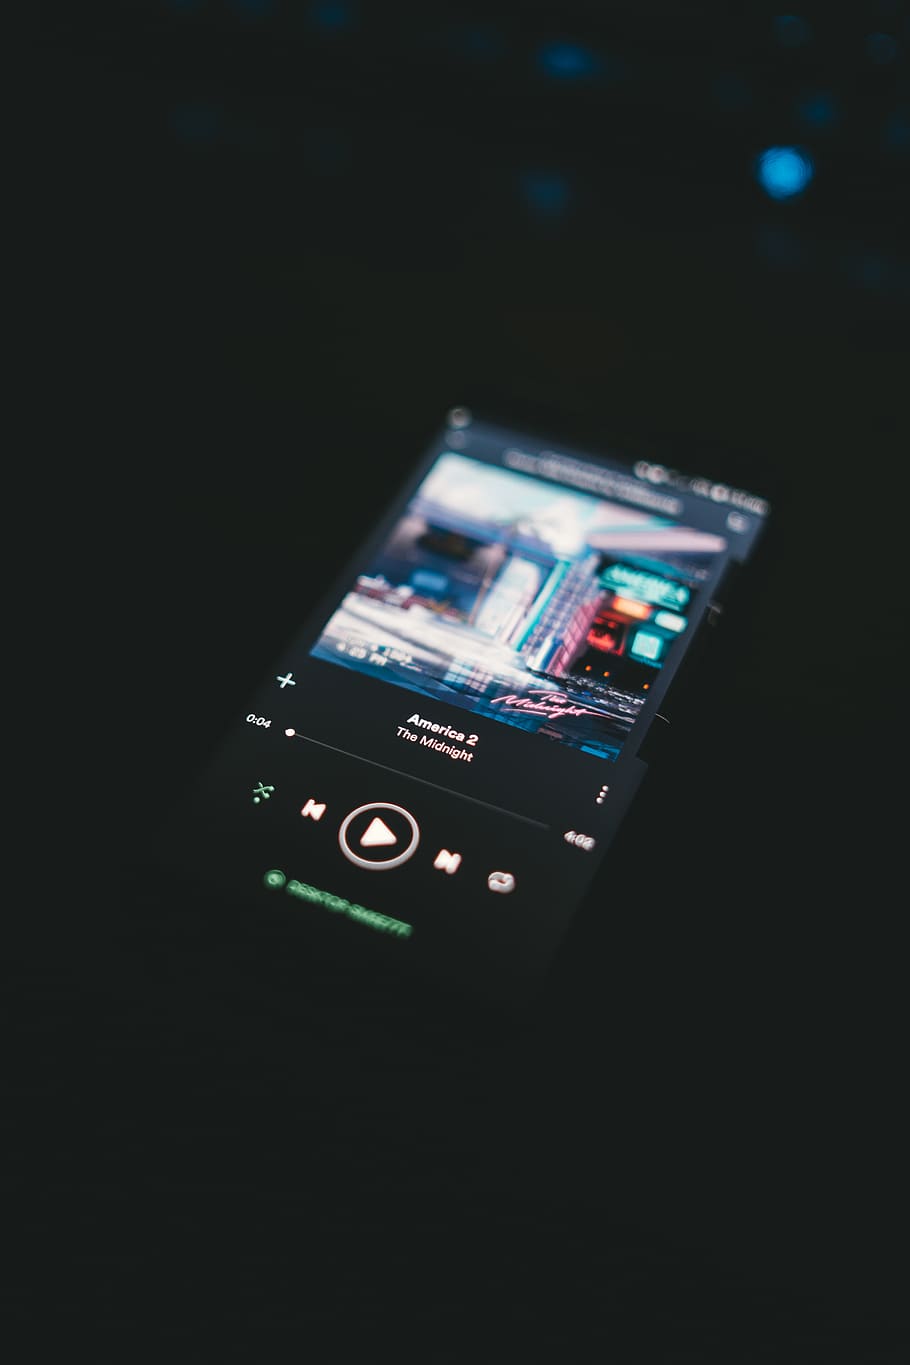 HD wallpaper: black smartphone turned-on displaying playing music,  electronics | Wallpaper Flare